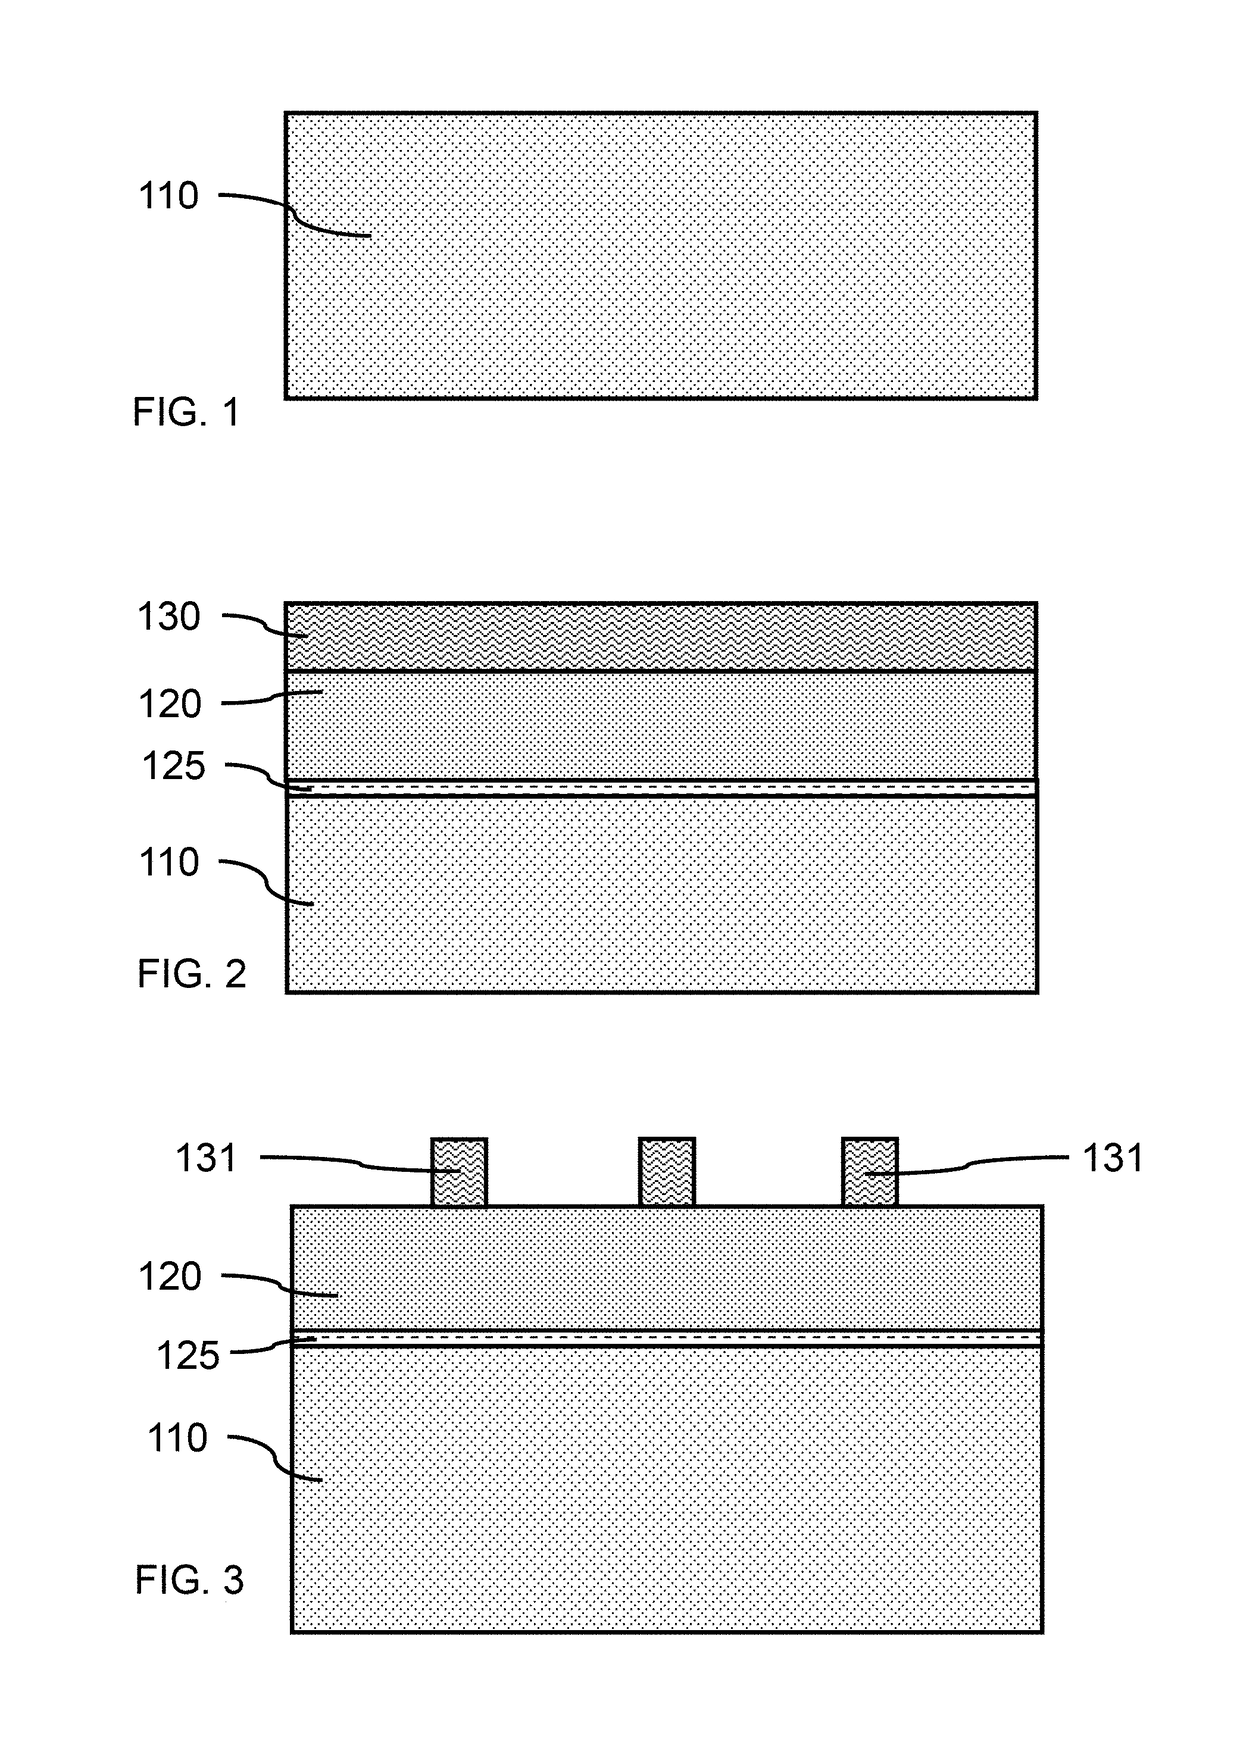 Fabrication of a vertical fin field effect transistor (vertical finfet) with a self-aligned gate and fin edges